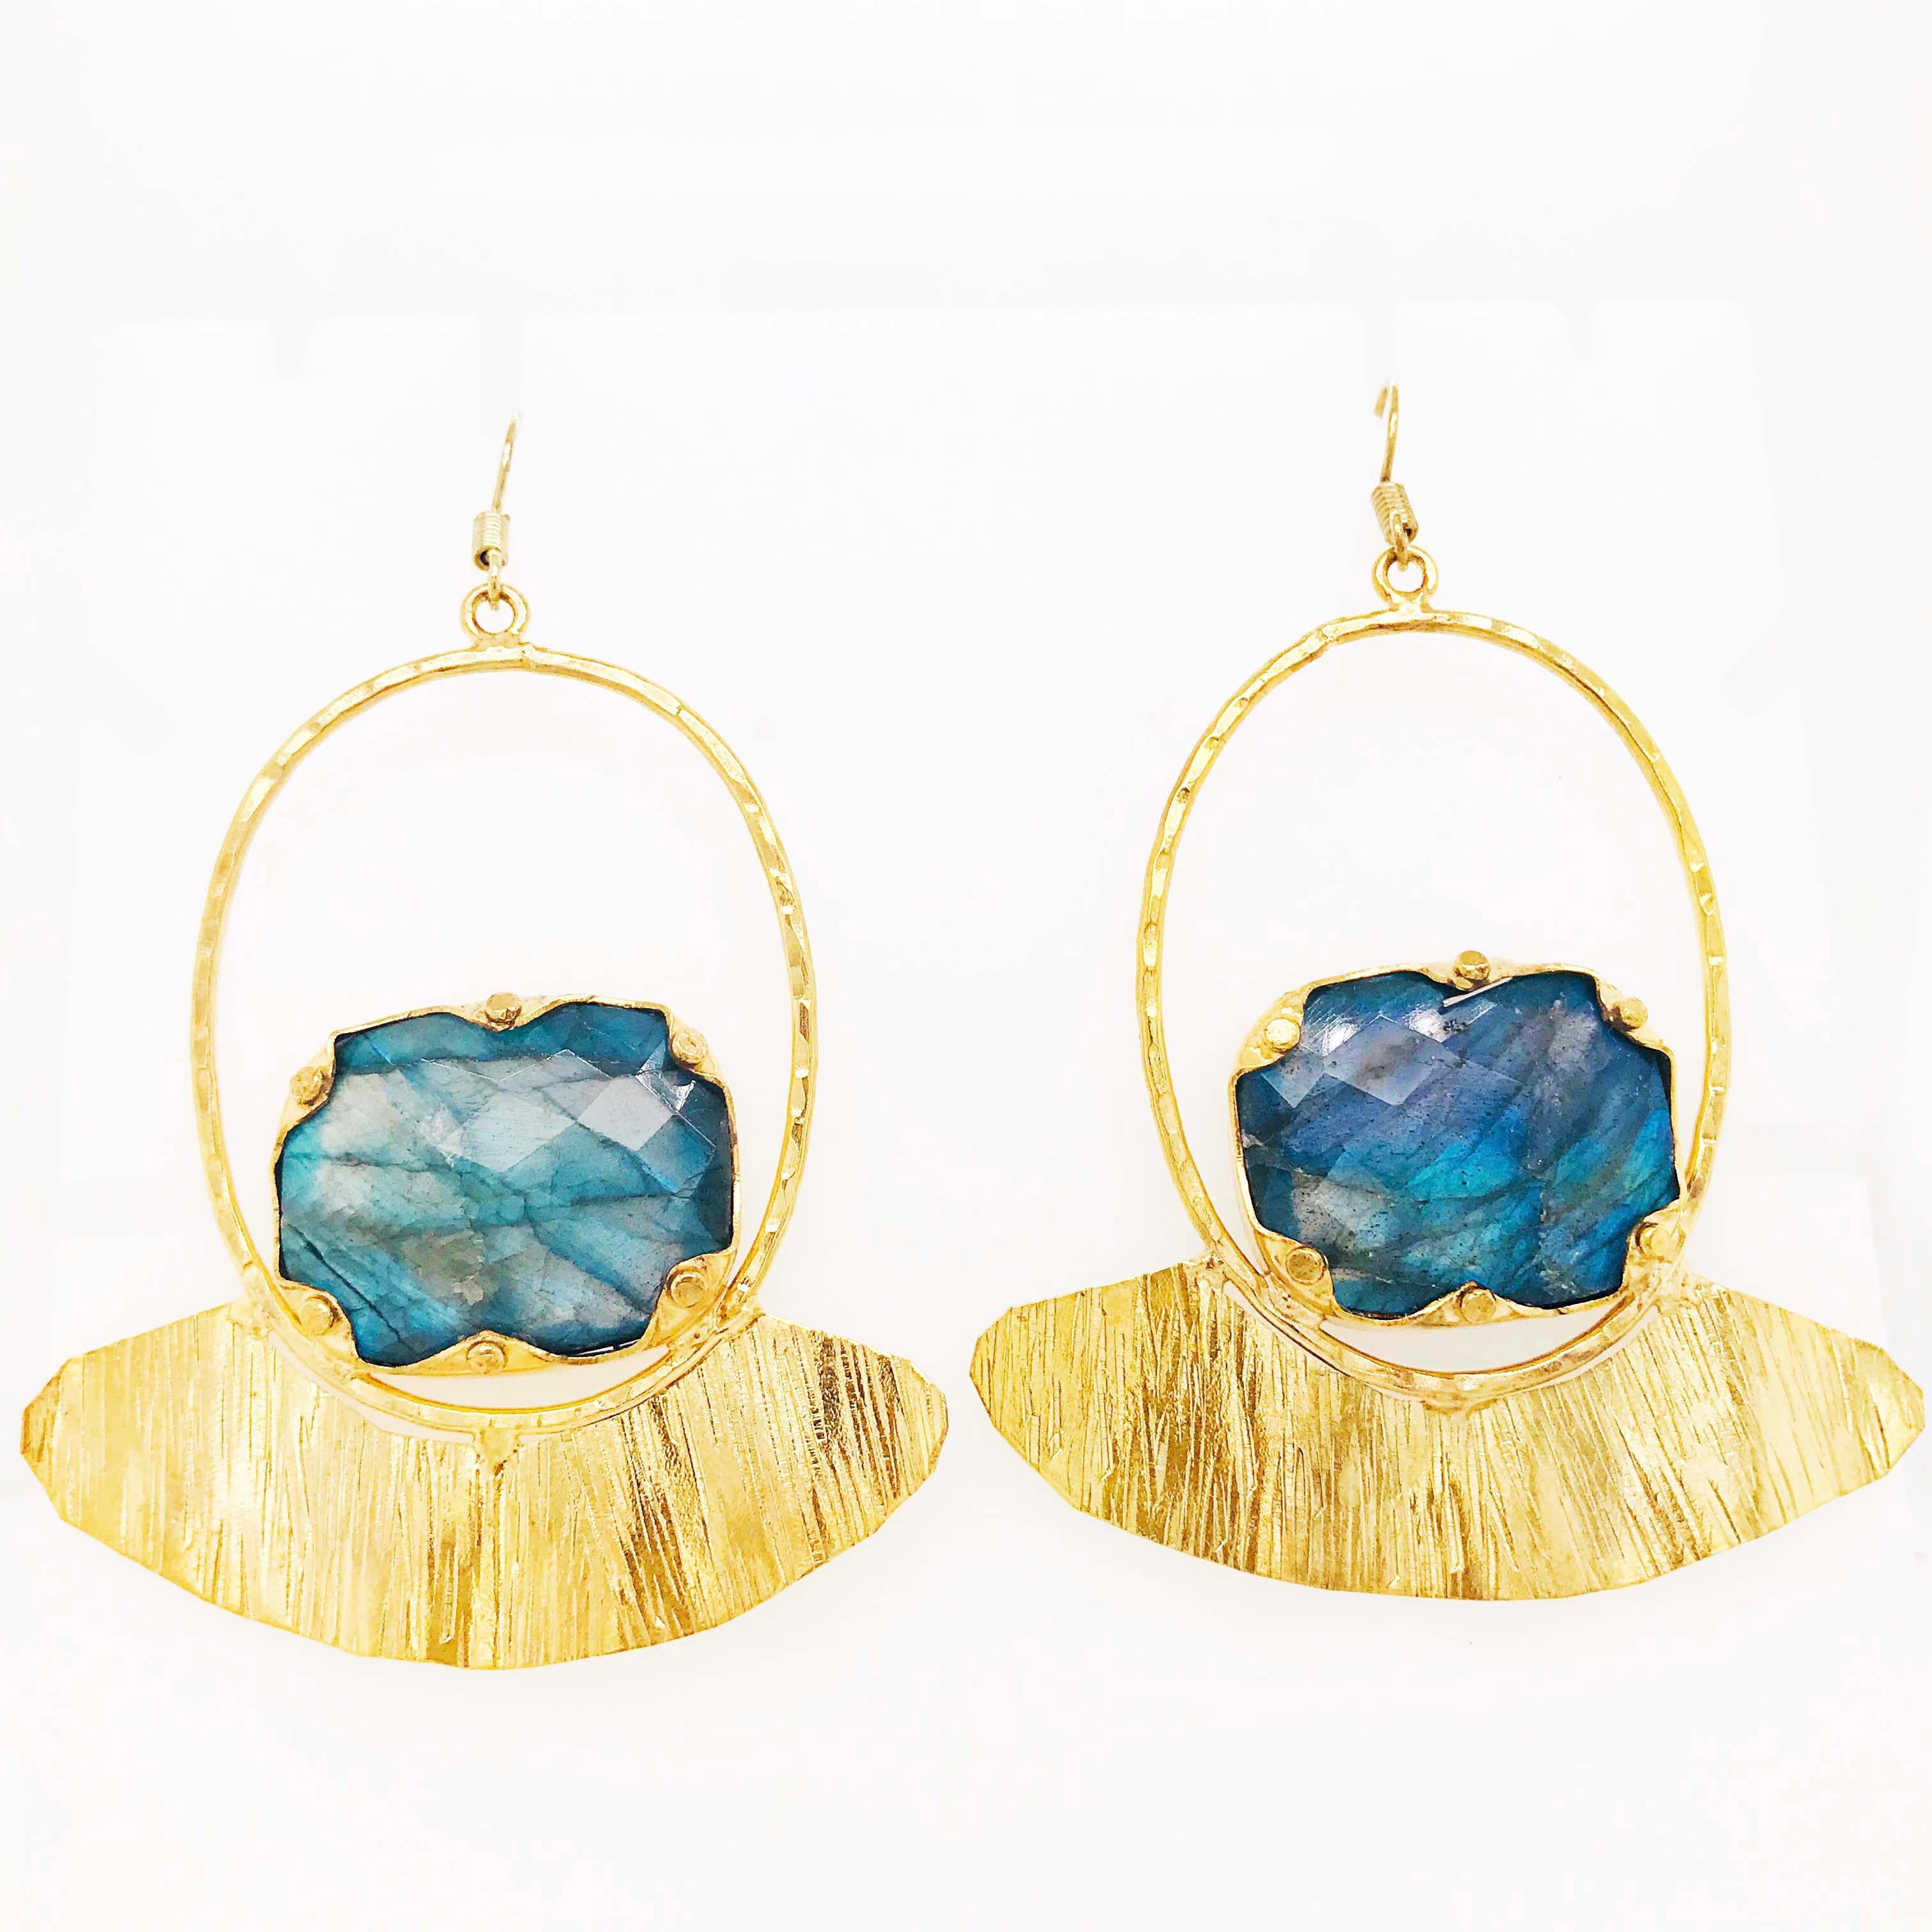 The bold labradorite earring dangles are a custom design with genuine labradorite gemstones and gold metal.   These organic earrings have a genuine piece of labradorite set in each earring. The labradorite gemstones have been hand cut and polished